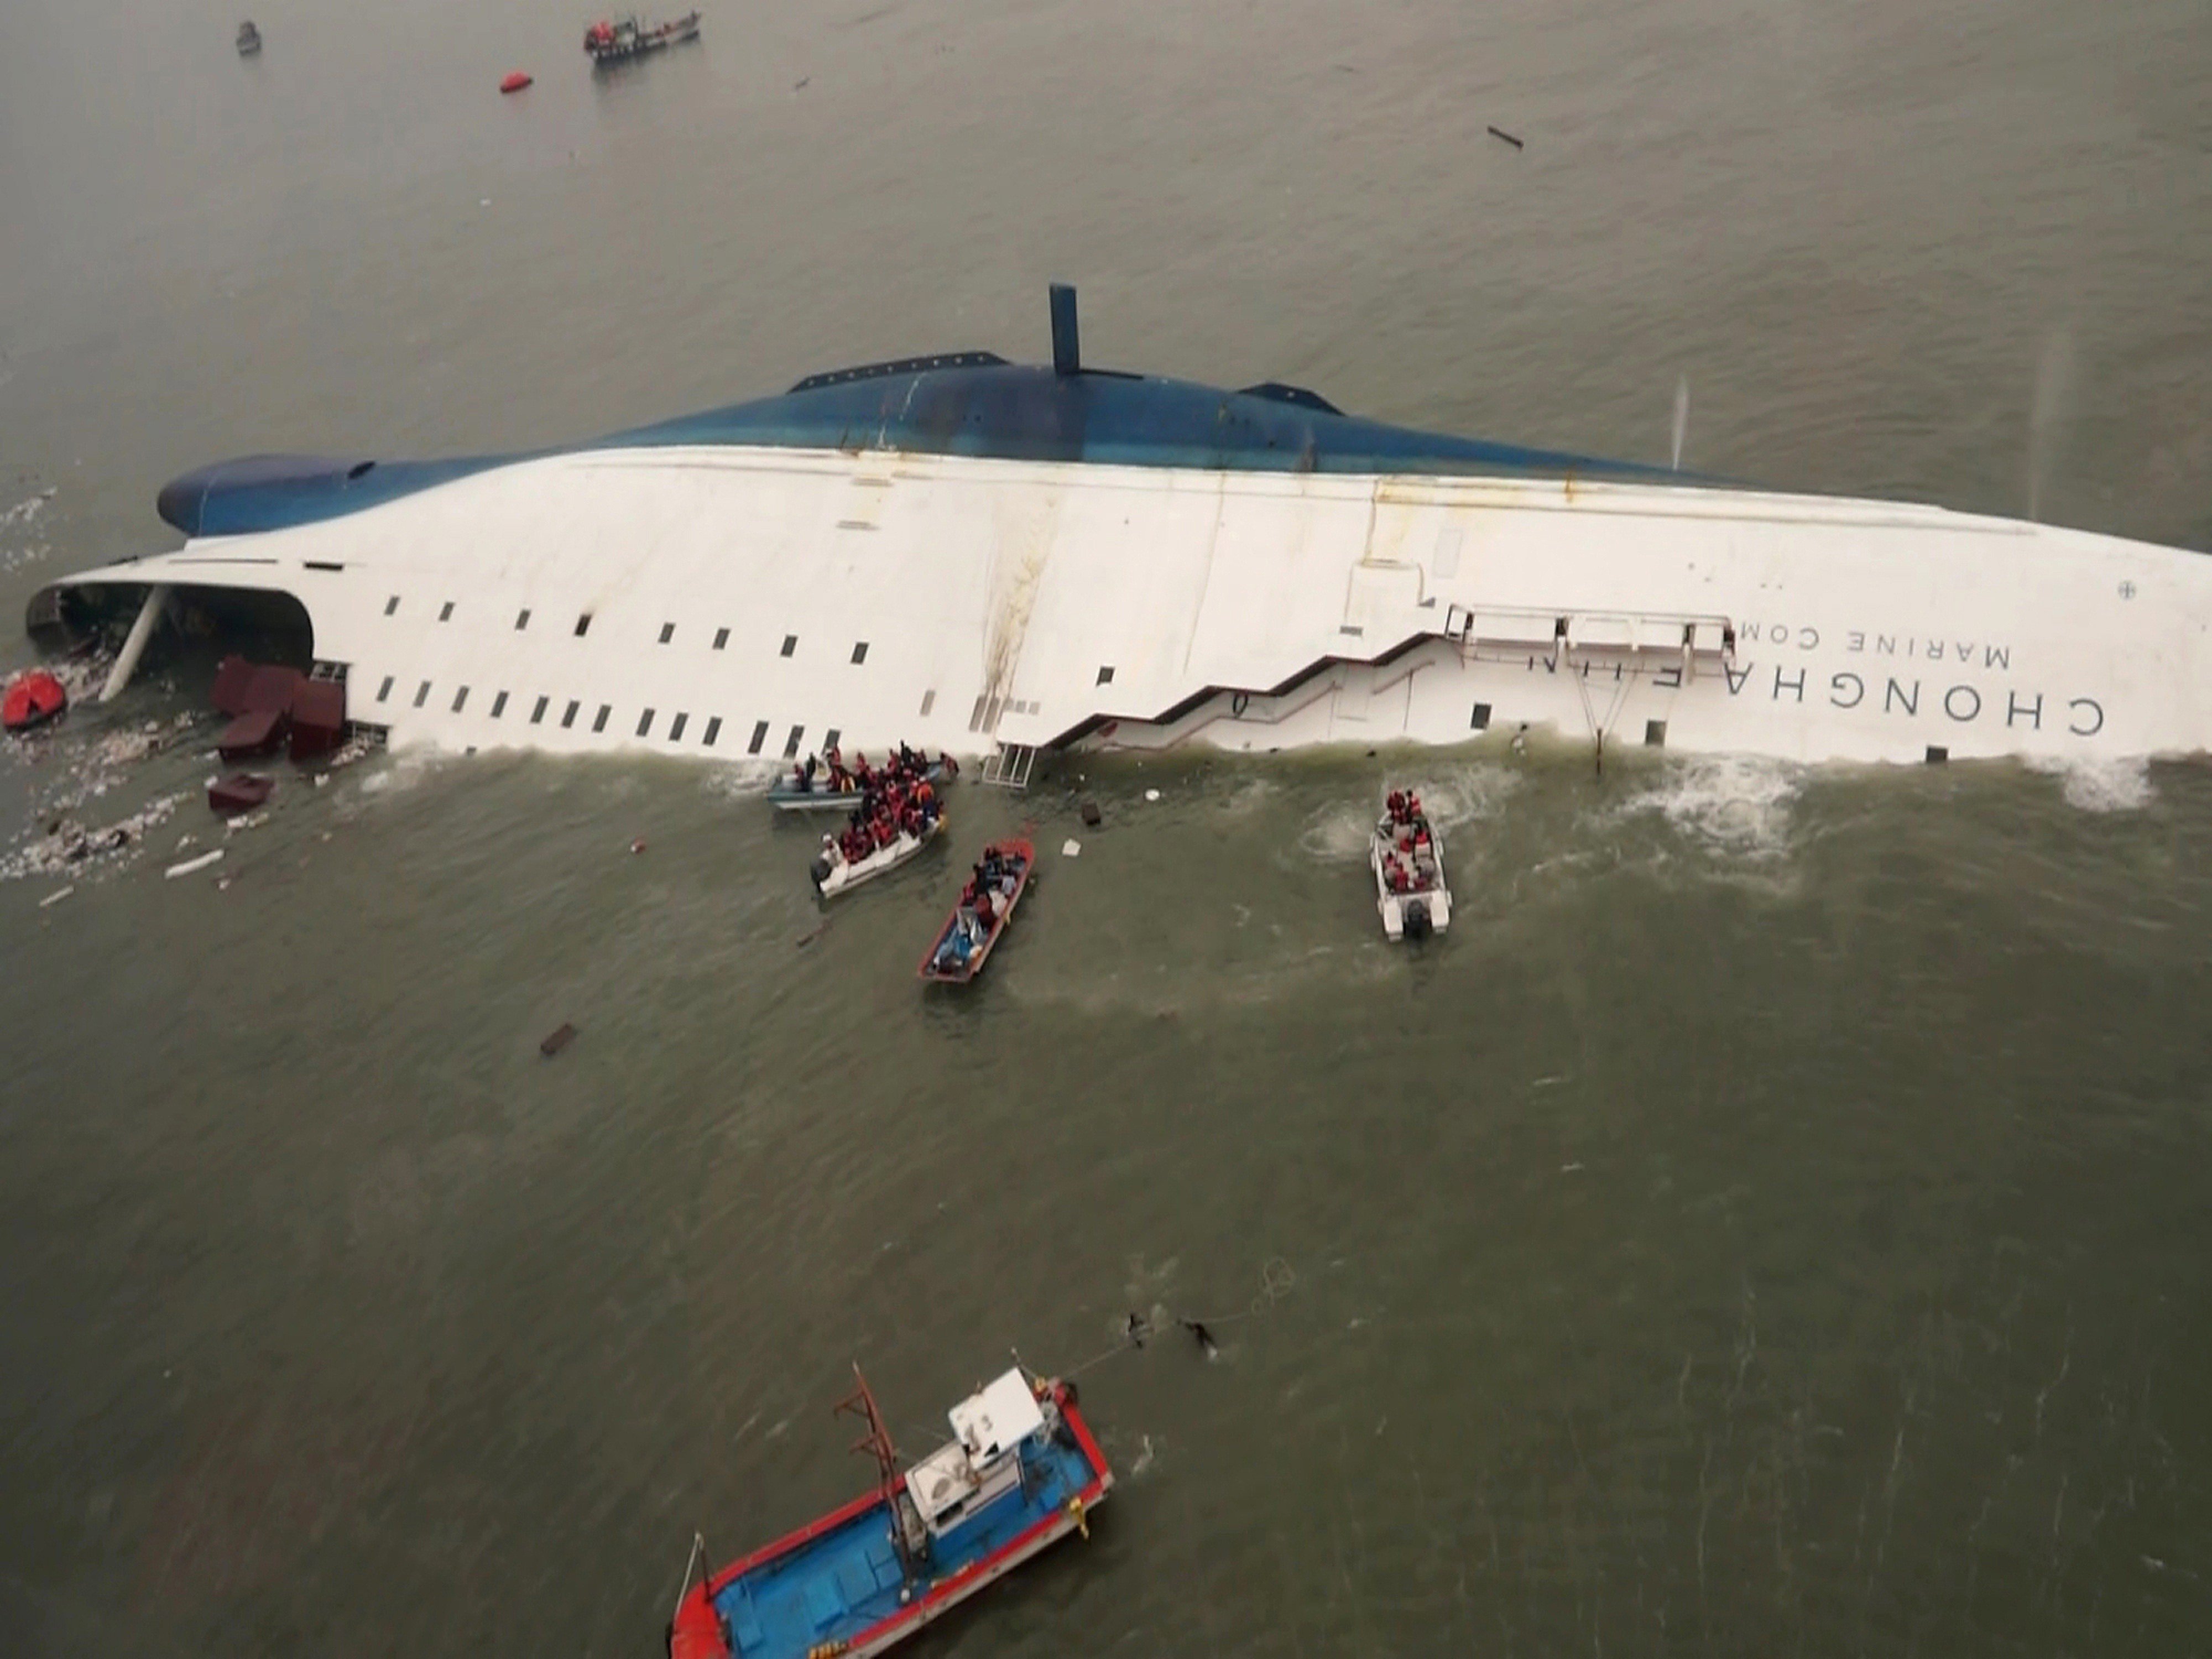 South Korean rescue boats and fishing boats approach the sinking South Korean ferry Sewol in the waters off Jindo, South Korea, on April 16, 2014. More than 300 people died, mostly school pupils. Photo: AP